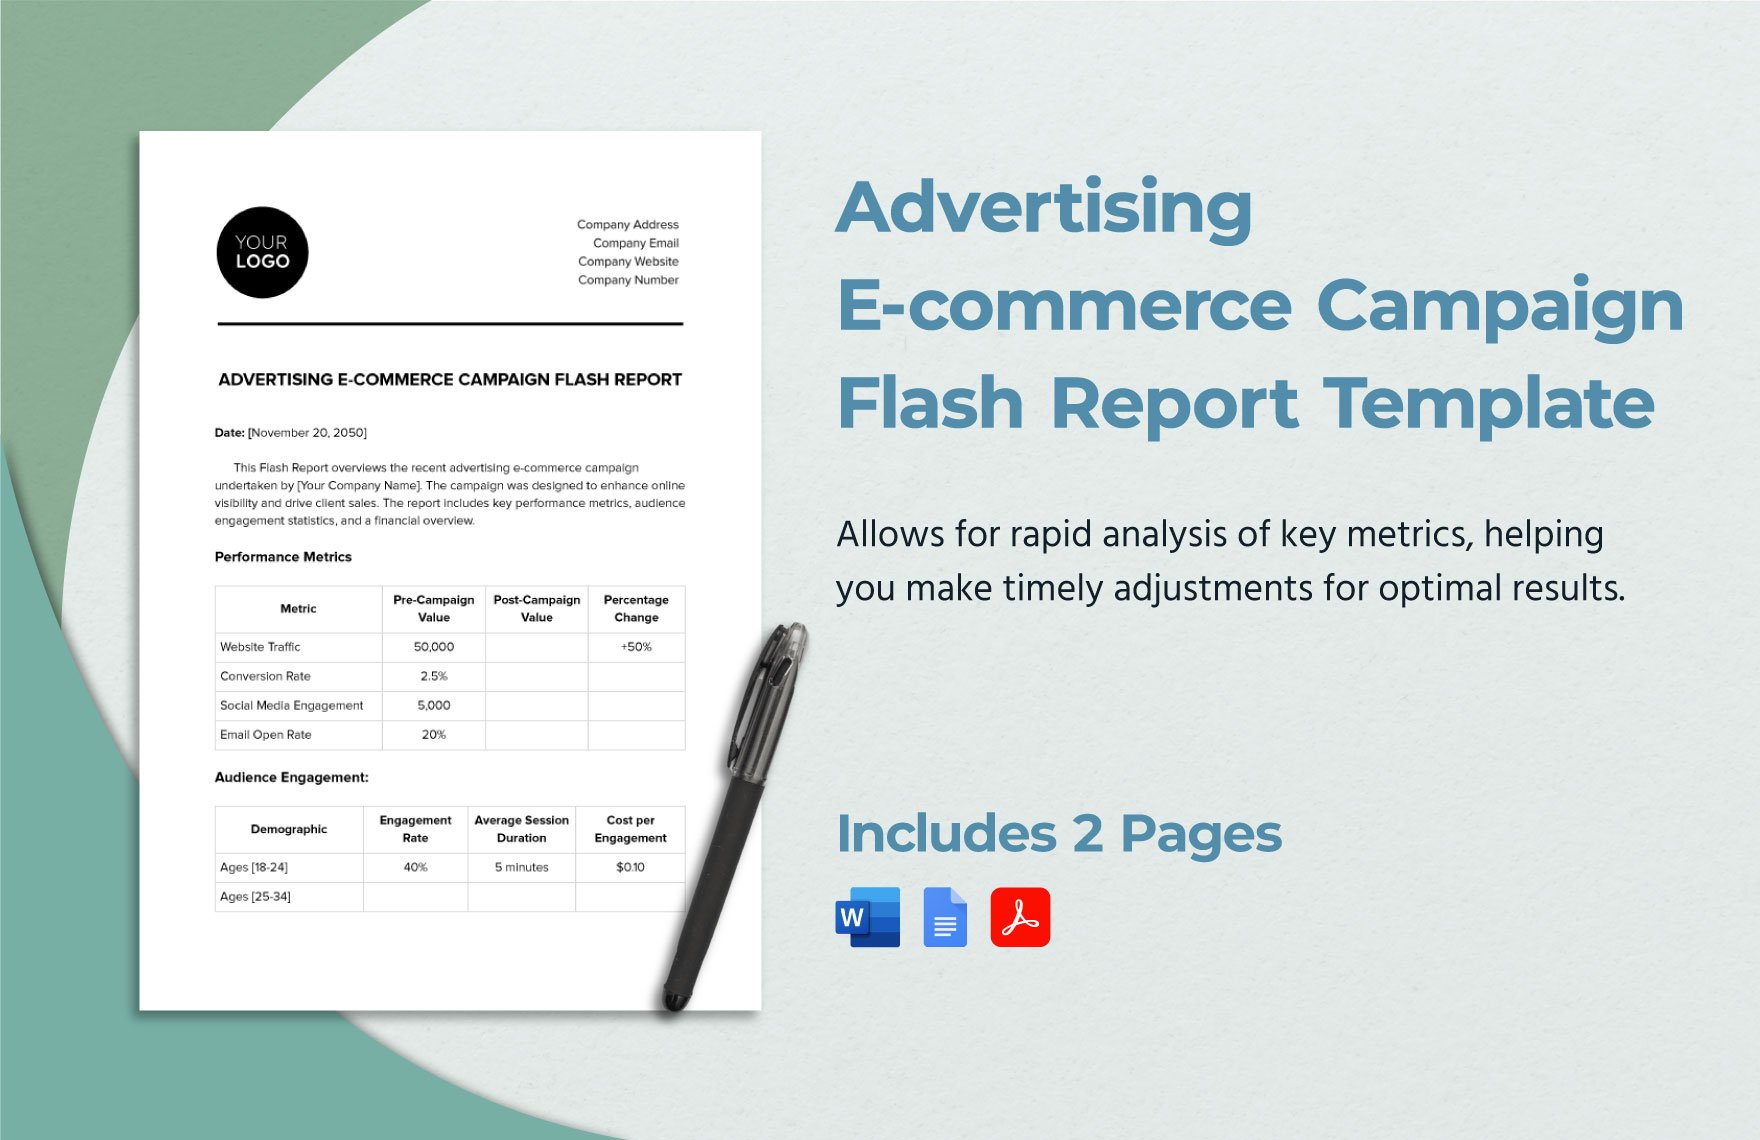 Advertising E-commerce Campaign Flash Report Template